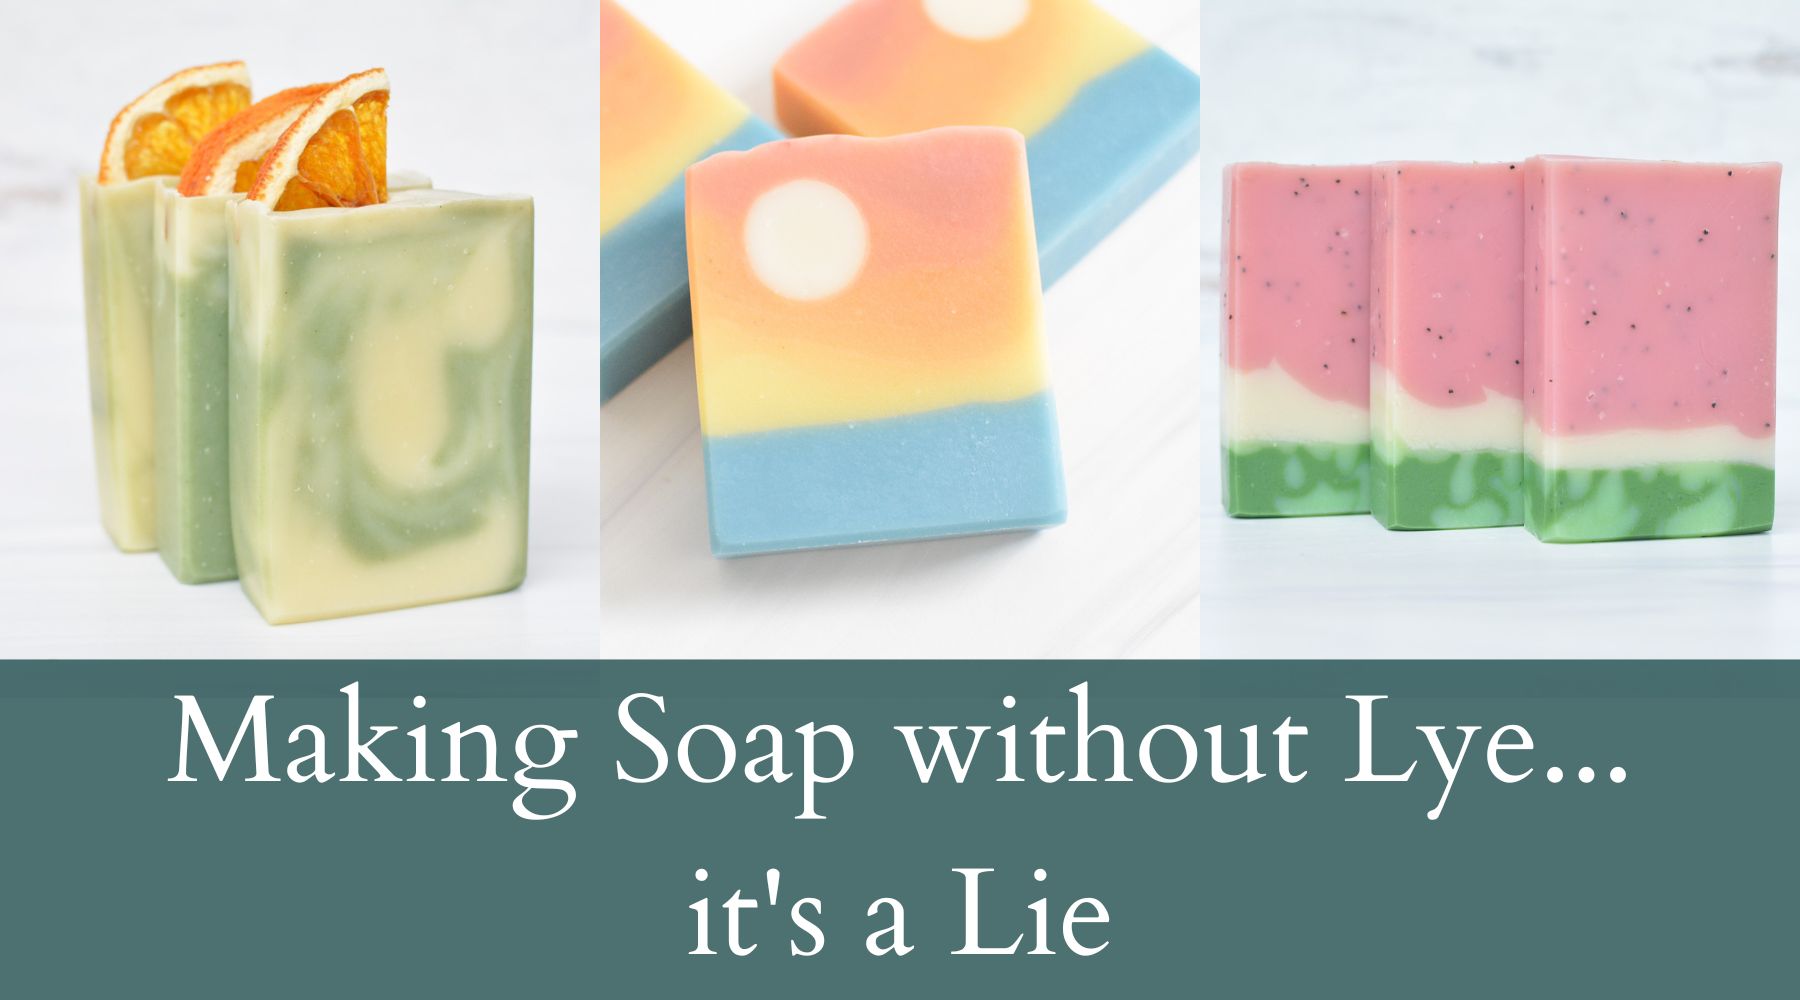 What is Lye? Can I Make Soap Without it? - Oh, The Things We'll Make!